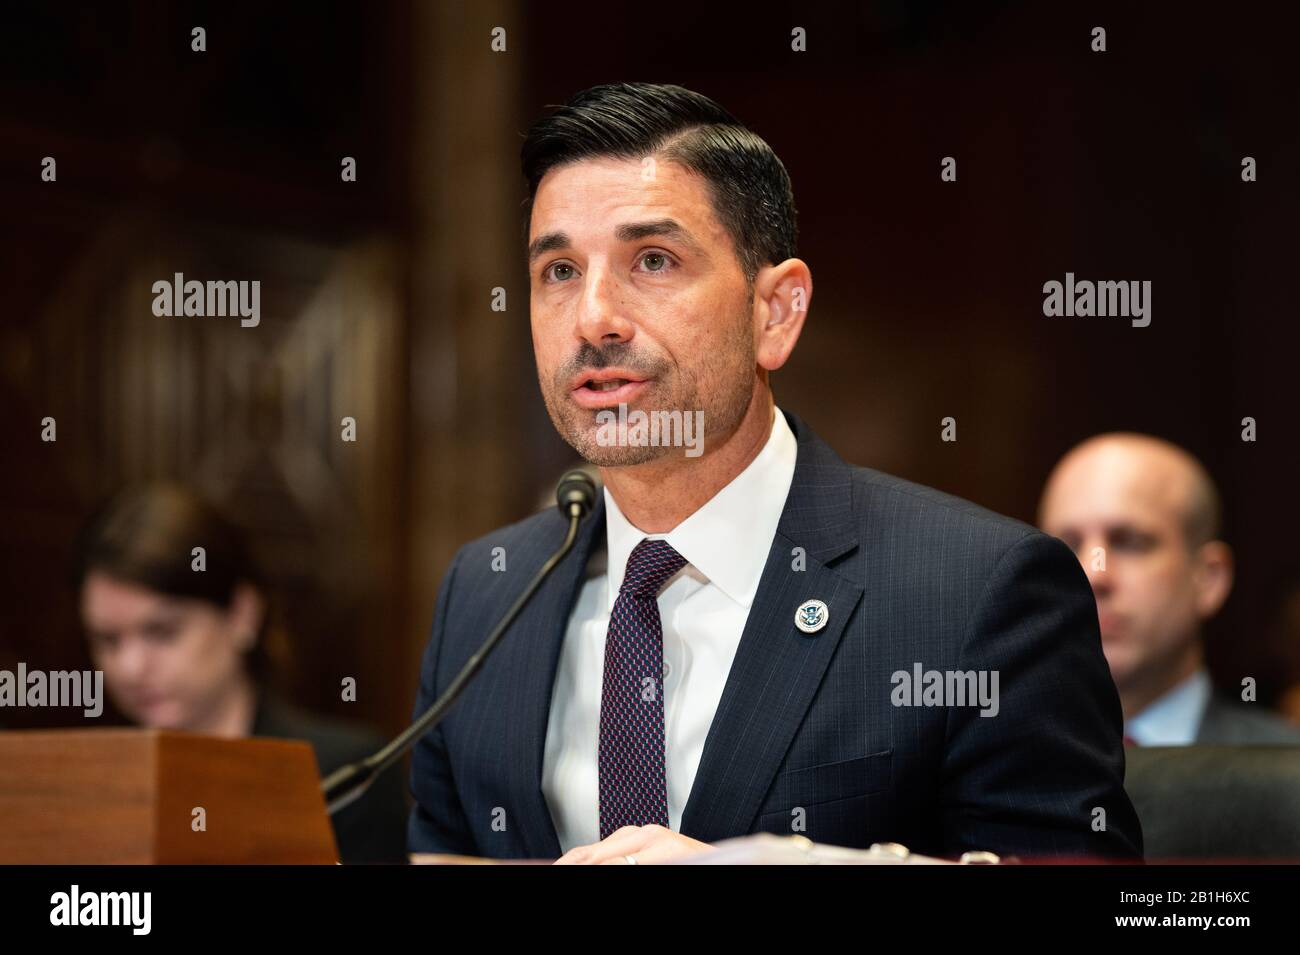 Chad Wolf, Acting Secretary, U.S. Department of Homeland Security, testifying at a hearing of the Senate Appropriations Committee Subcommittee on the Department of Homeland Security. Stock Photo